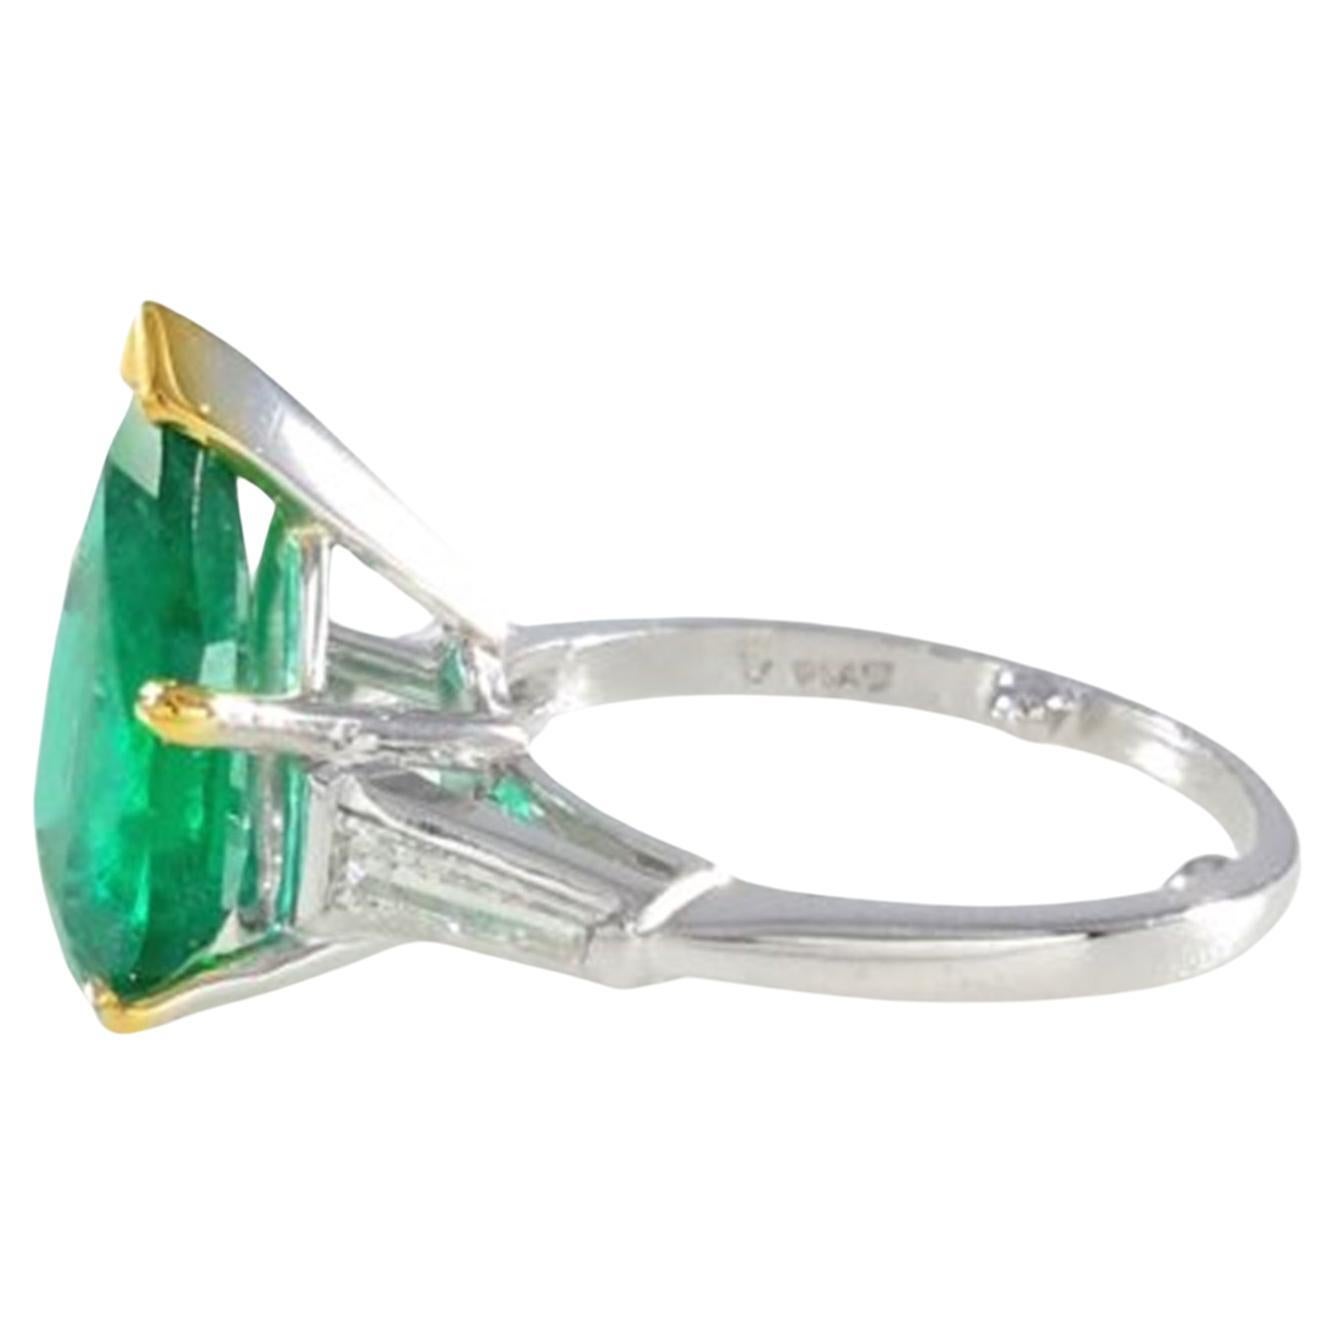 Stunning Pear Cut Emerald: Adorn yourself with the allure of nature's finest gemstone. Our exquisite 3-carat pear cut emerald captures the essence of elegance and sophistication, radiating vibrant hues of green with every glance.

Accompanied by